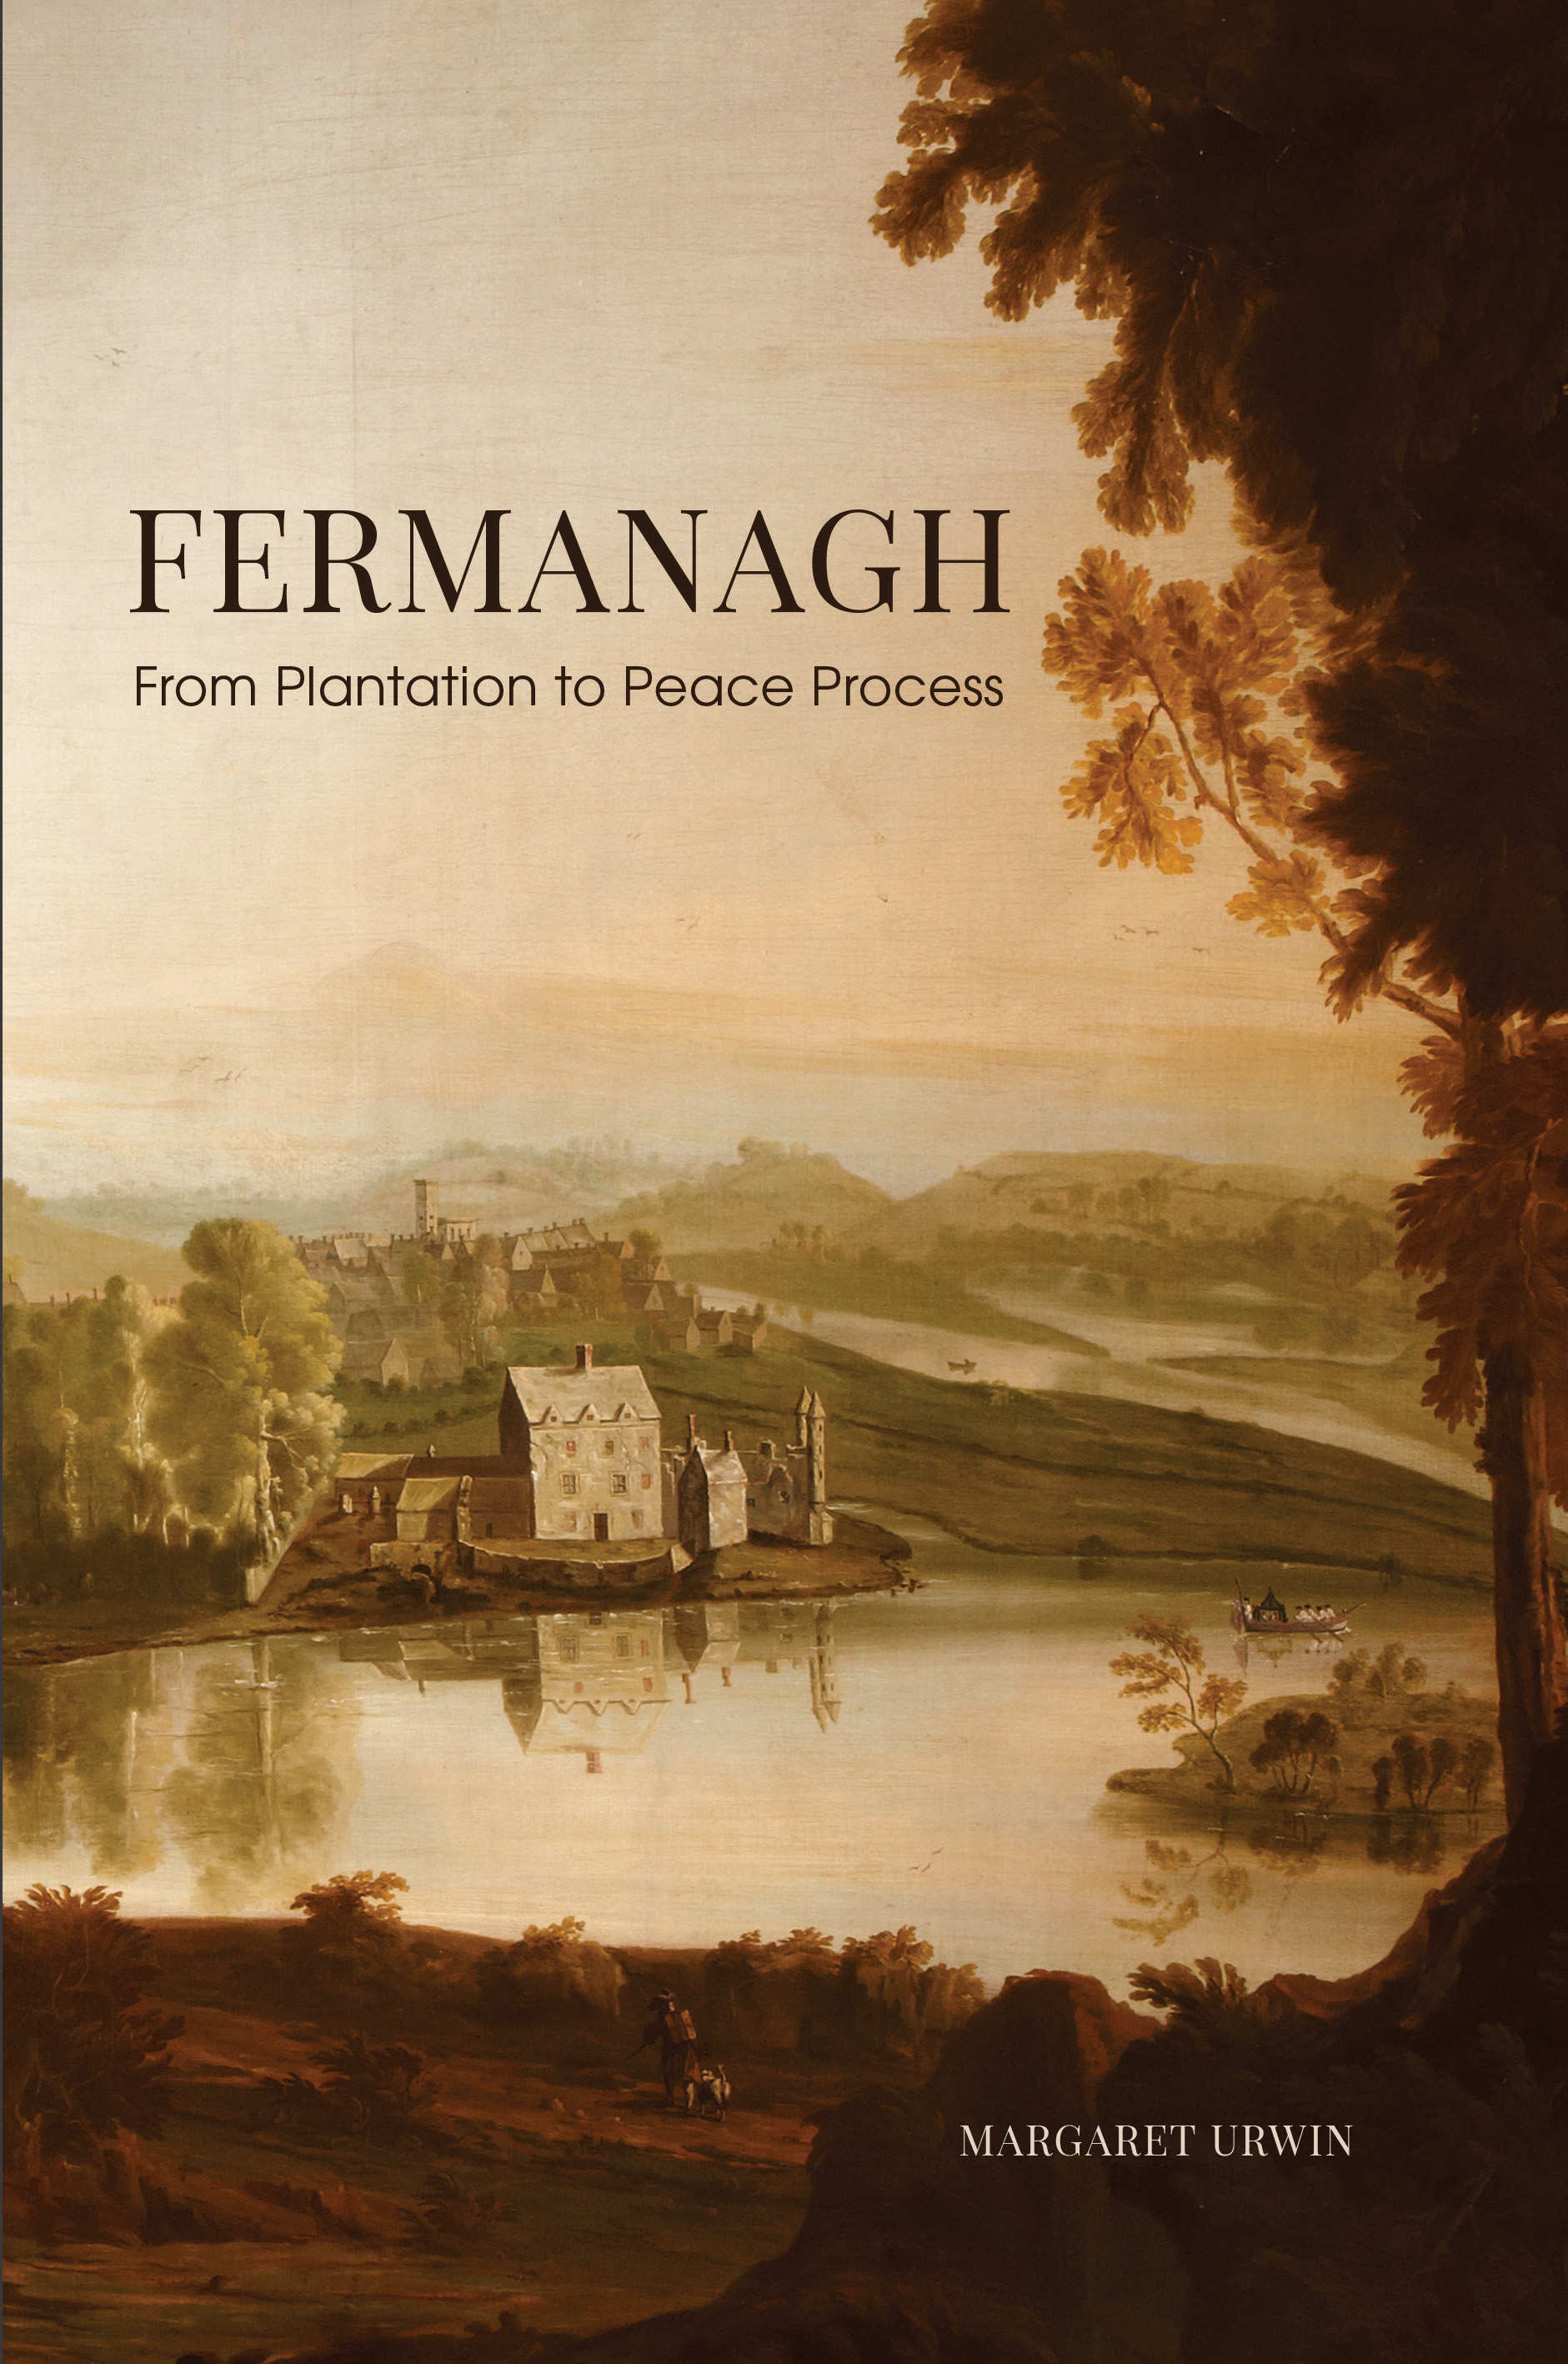 Fermanagh: From Plantation to Peace Process